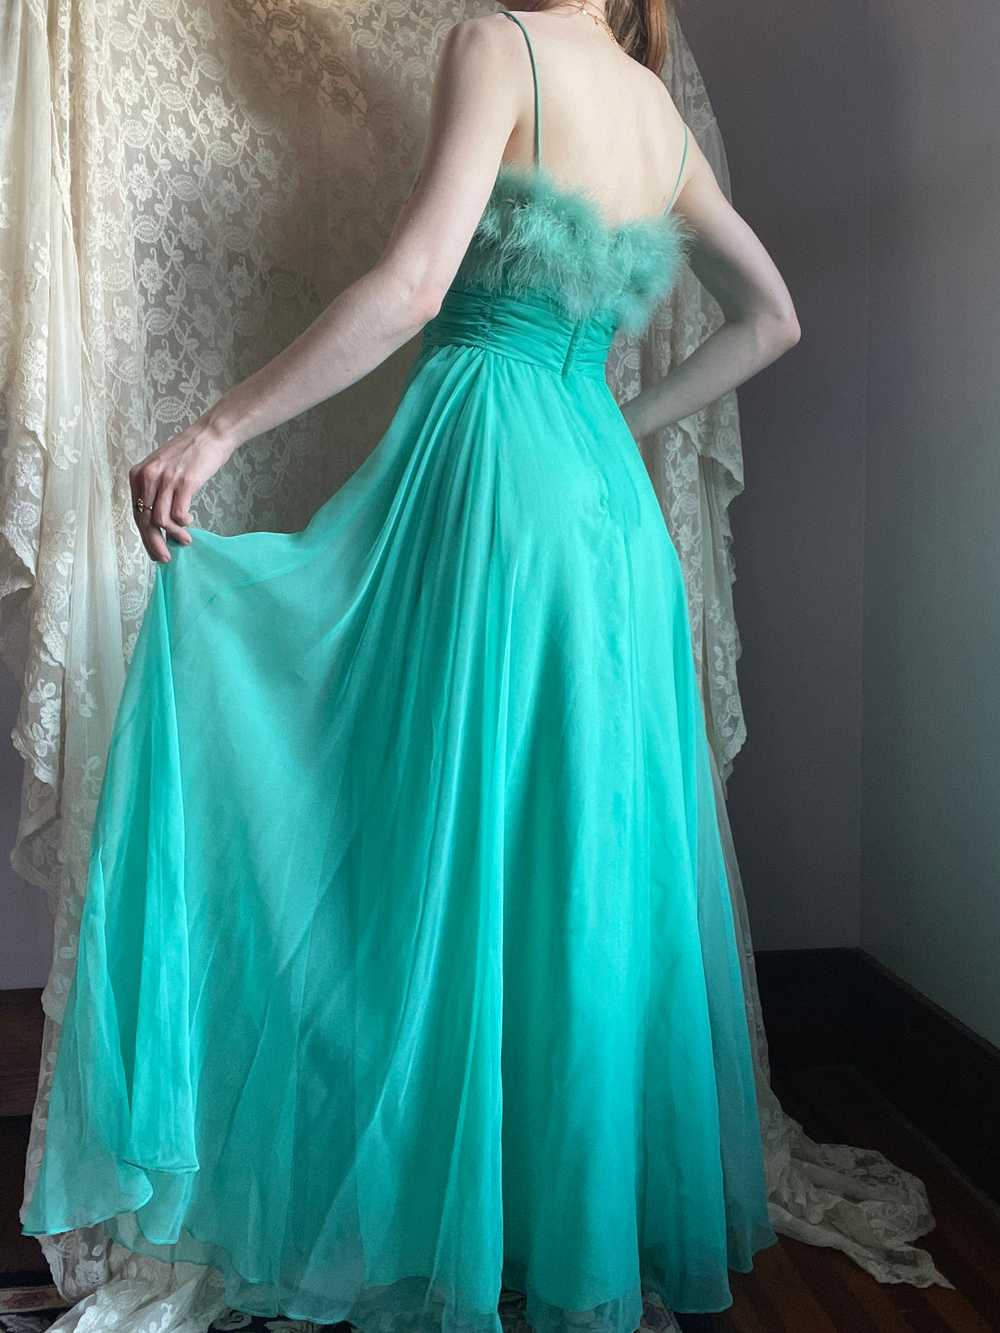 1960s Marabou Feather Green Chiffon Gown Dress - image 6